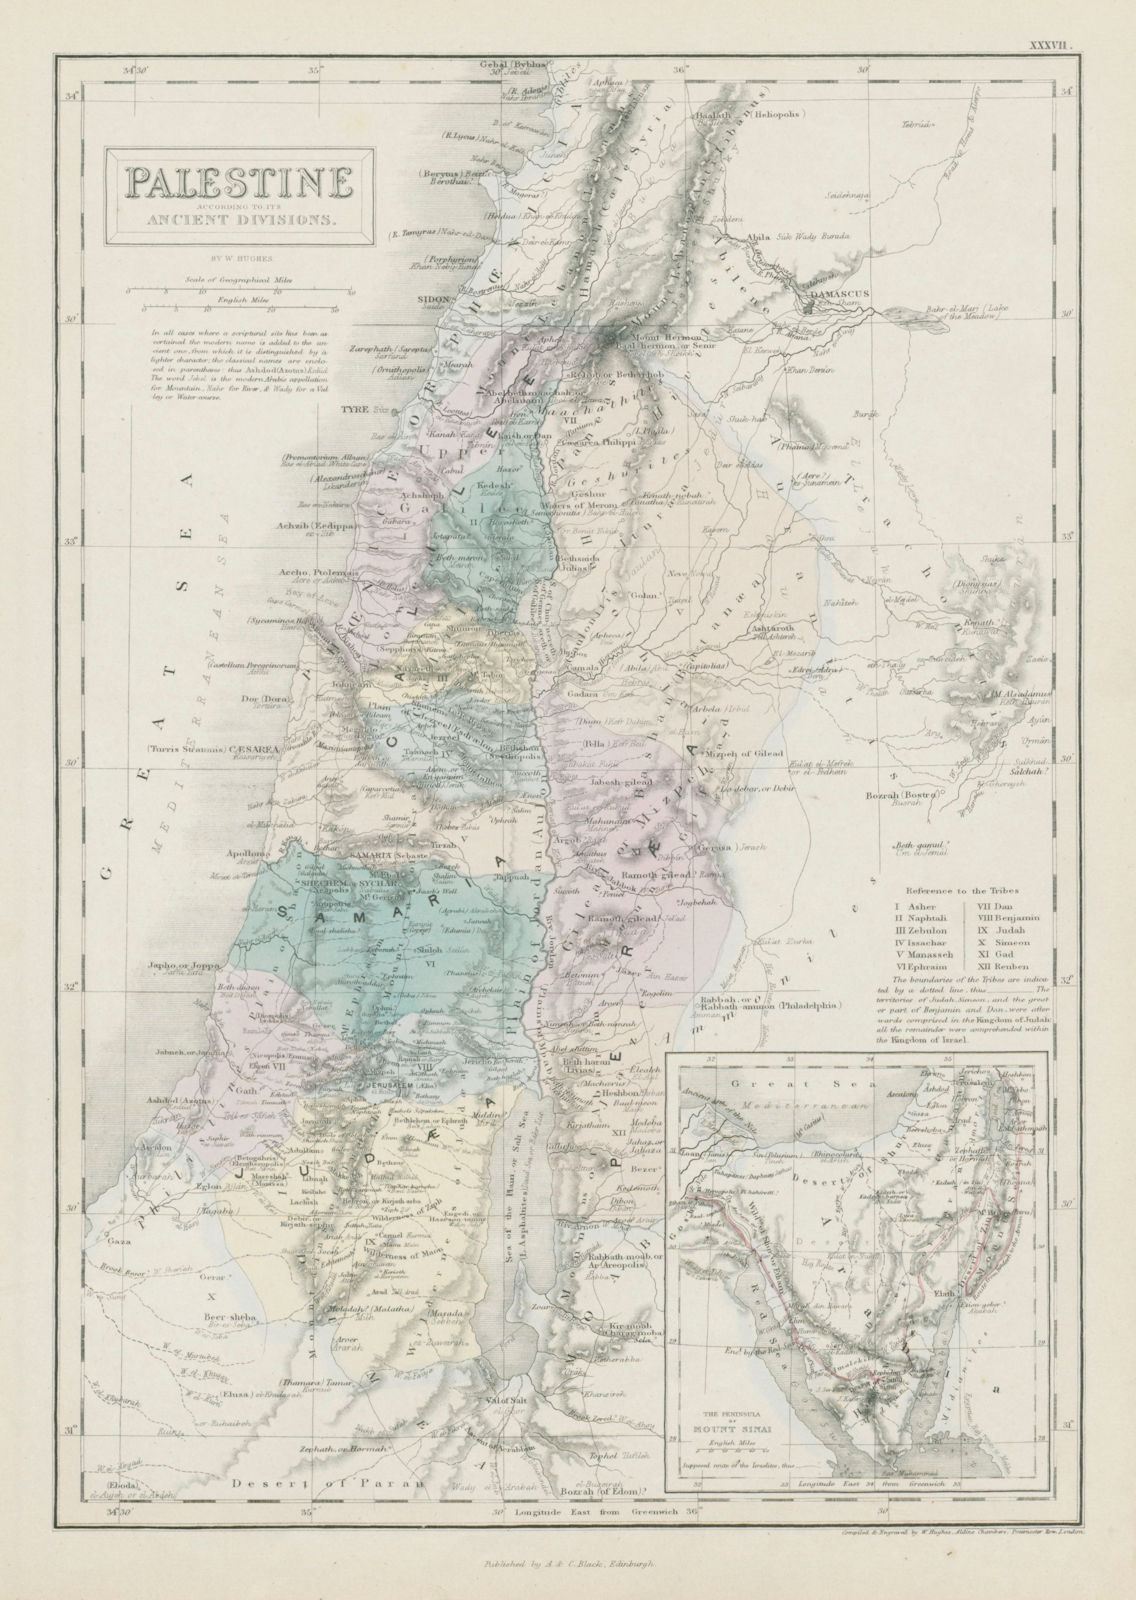 Associate Product Palestine with its ancient divisions. Inset Sinai peninsula. HUGHES 1856 map